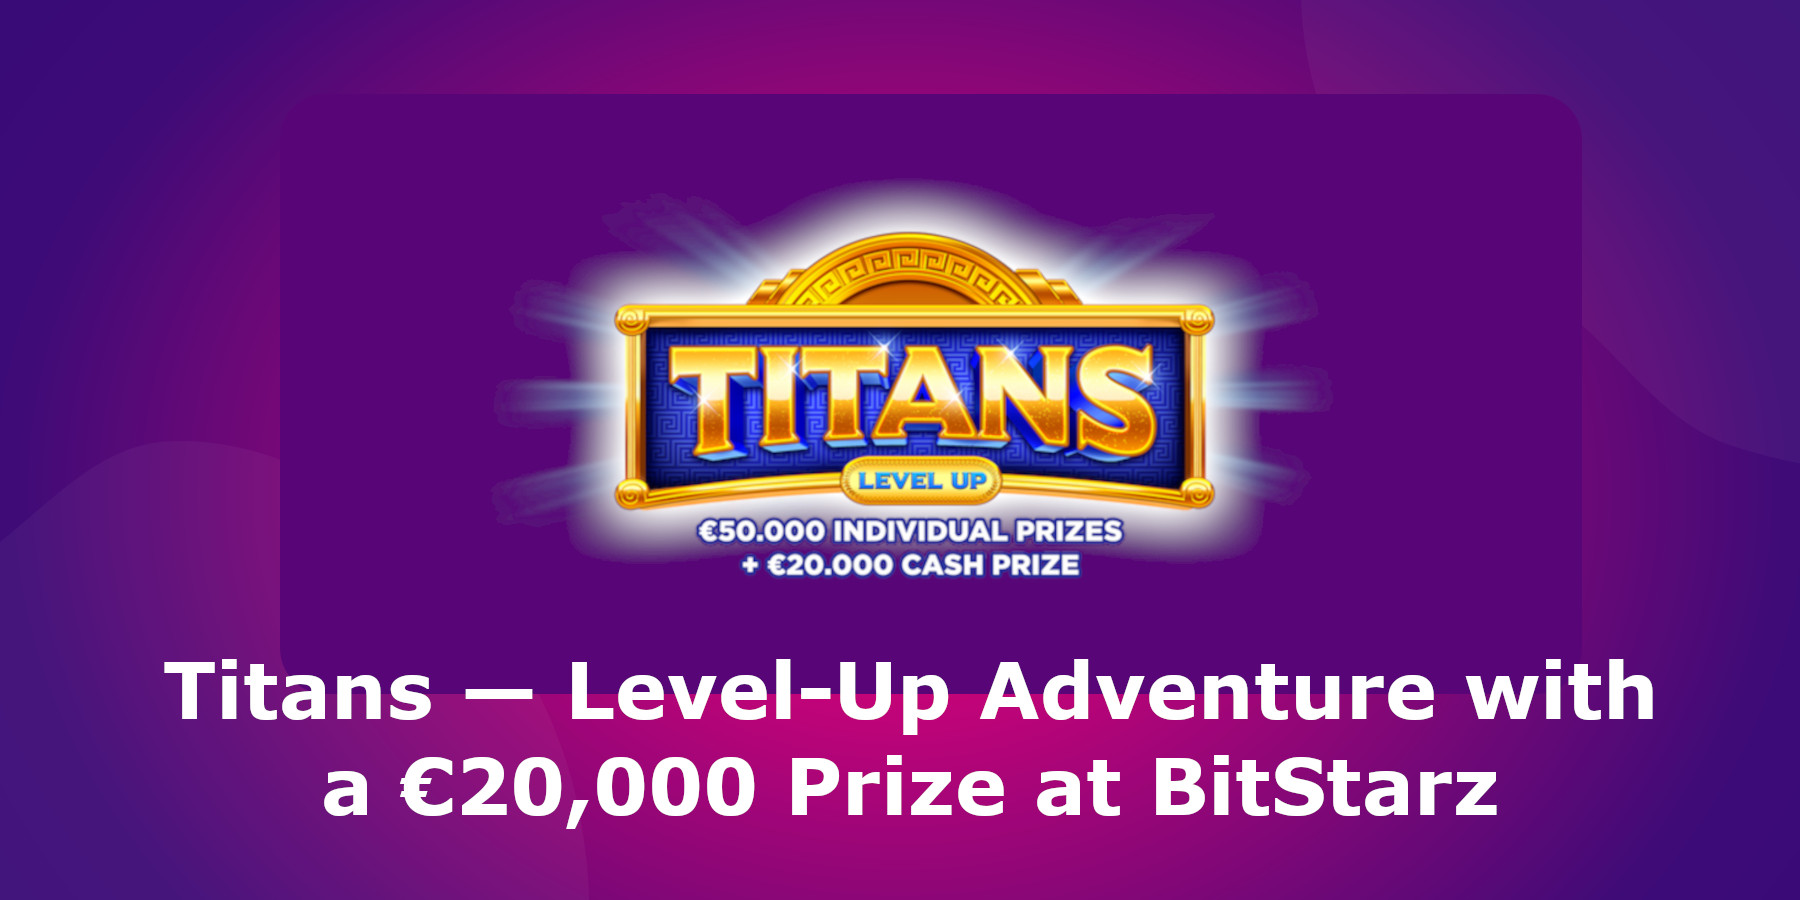 Titans — Level-Up Adventure with a €20,000 Prize at BitStarz